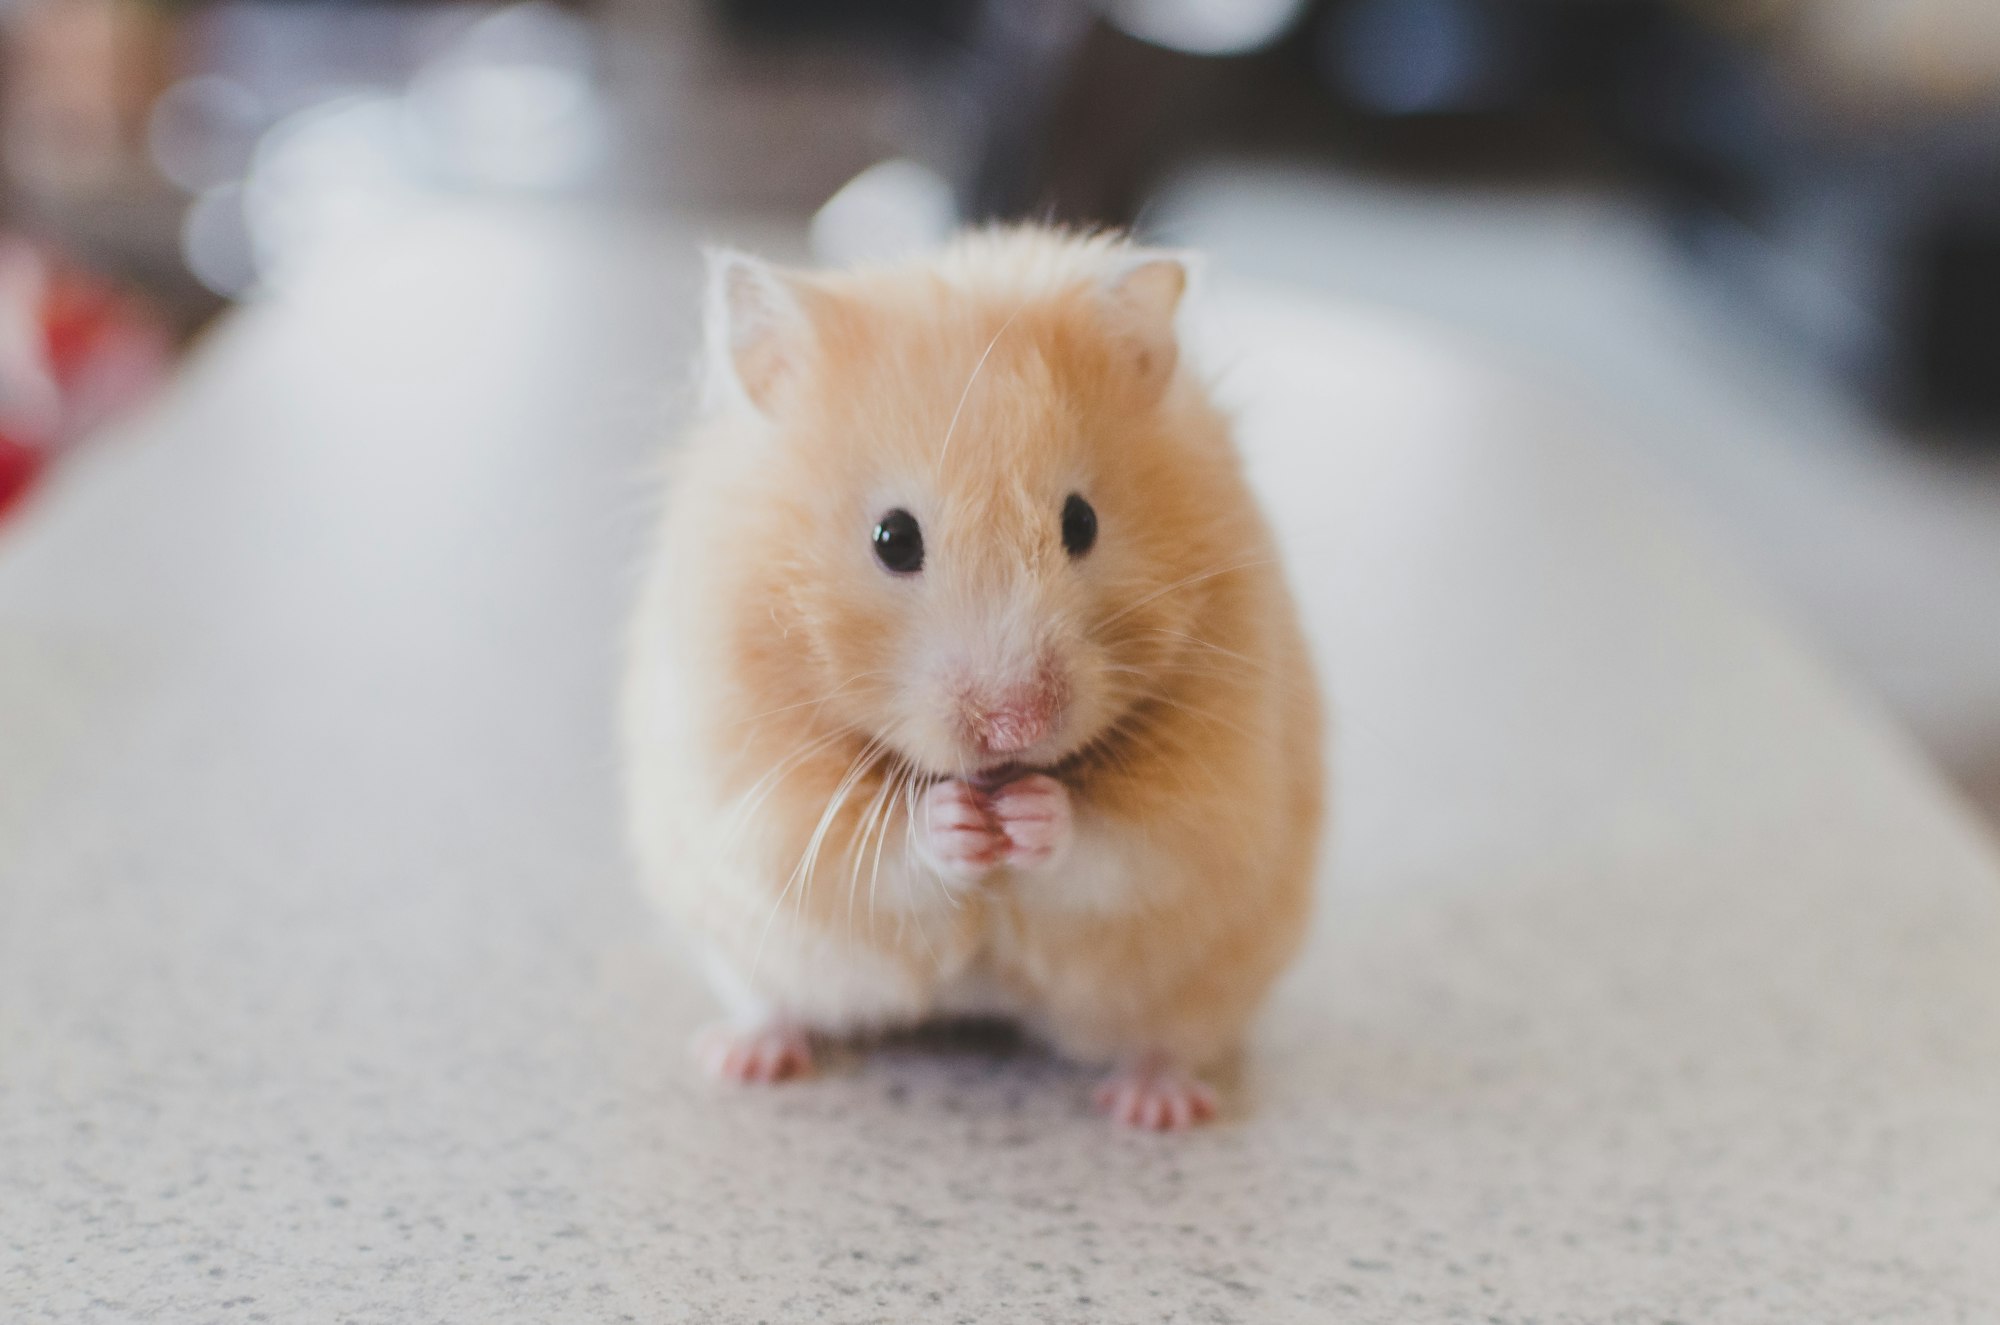 What Natural Foods Can Hamsters Eat?